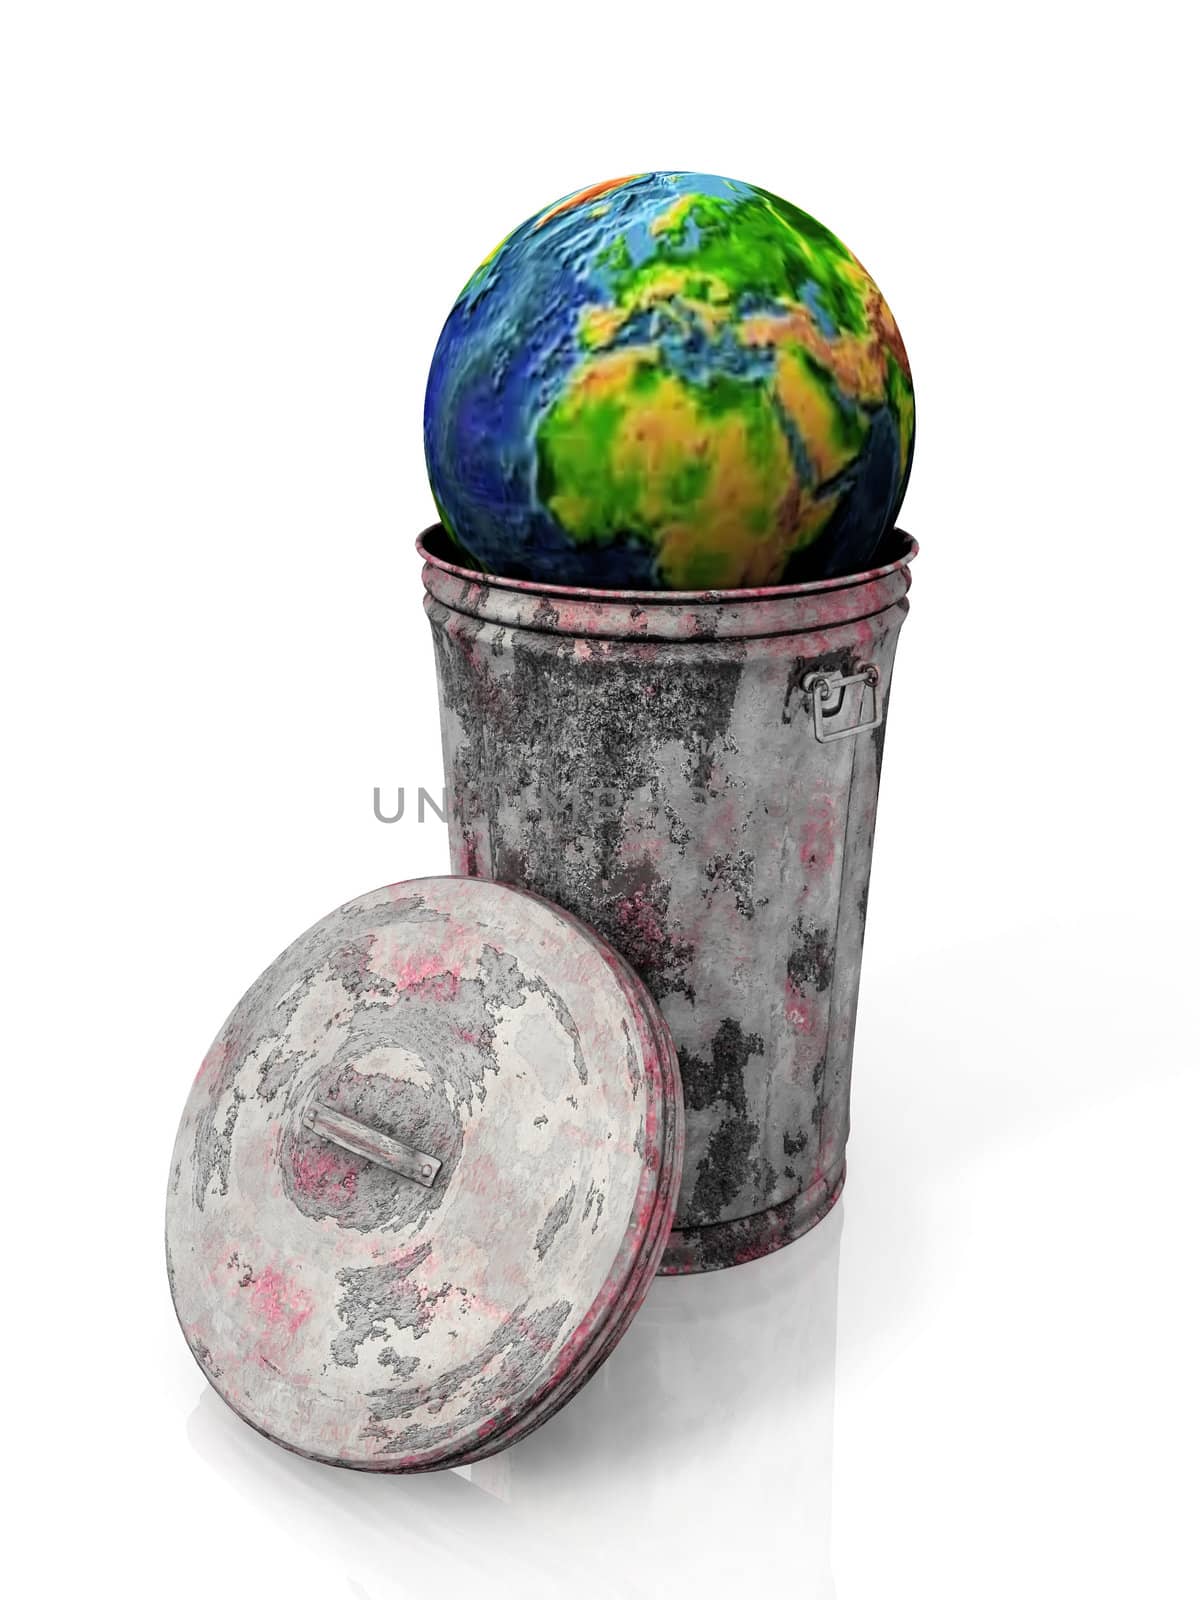 the Earth in the trash